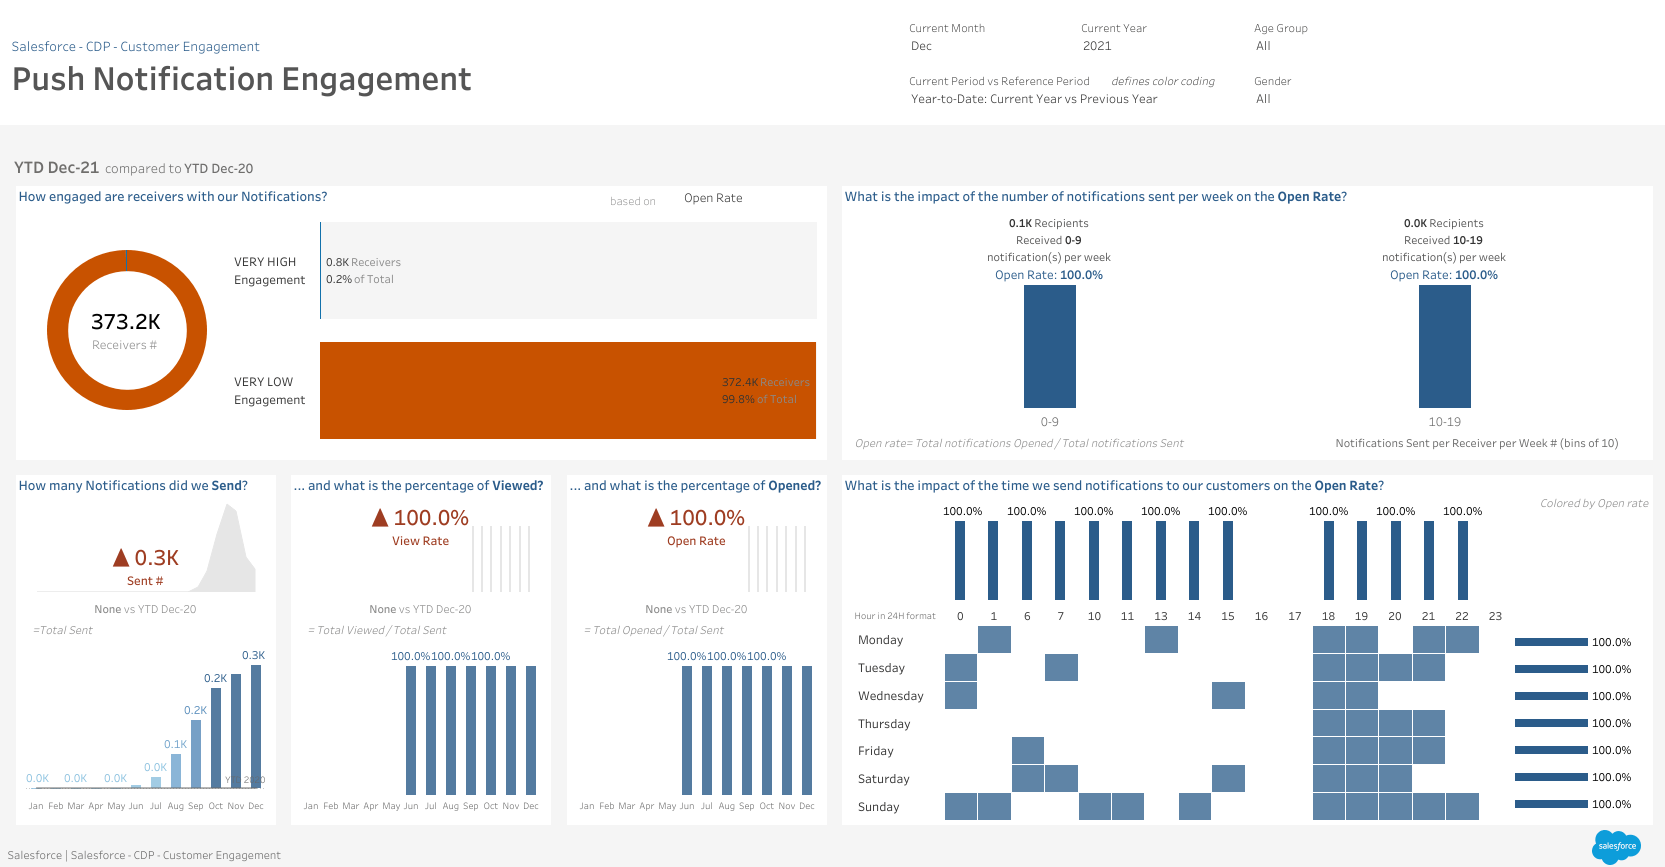 A dashboard displaying push notification trends, KPIs, and insights.